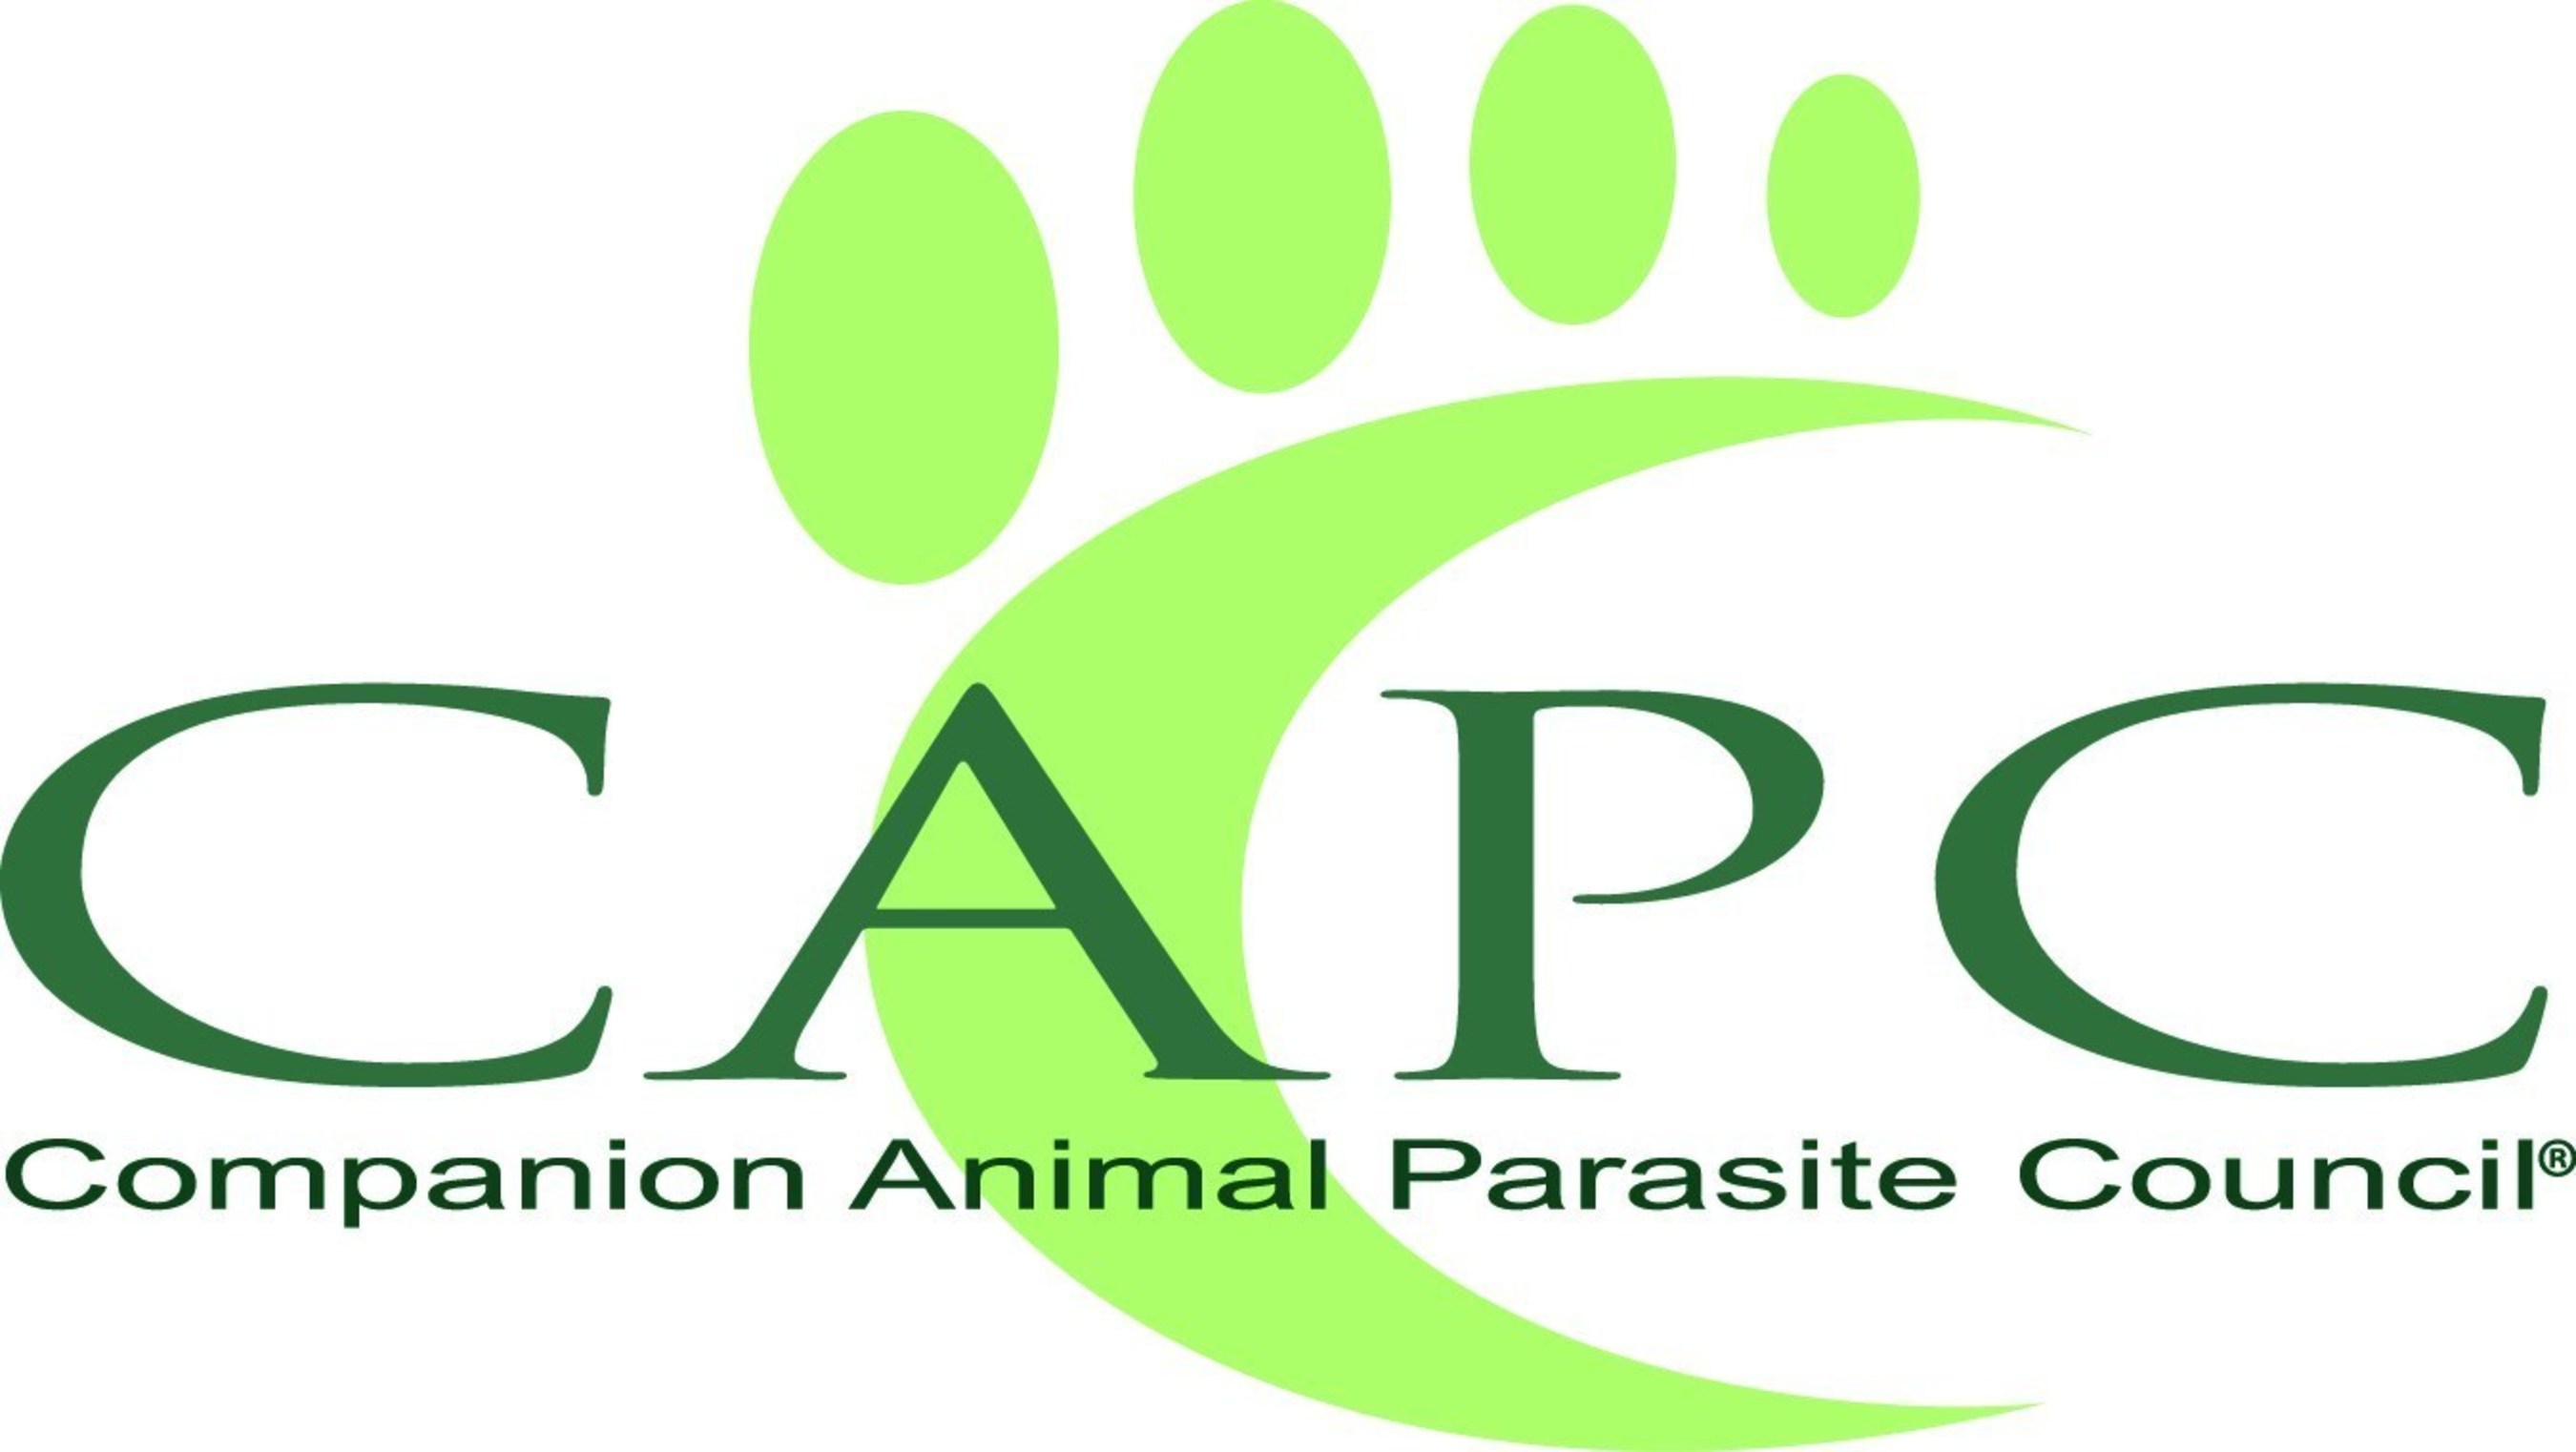 The Companion Animal Parasite Council & Bayer launch Connecting with Today's Clients Study